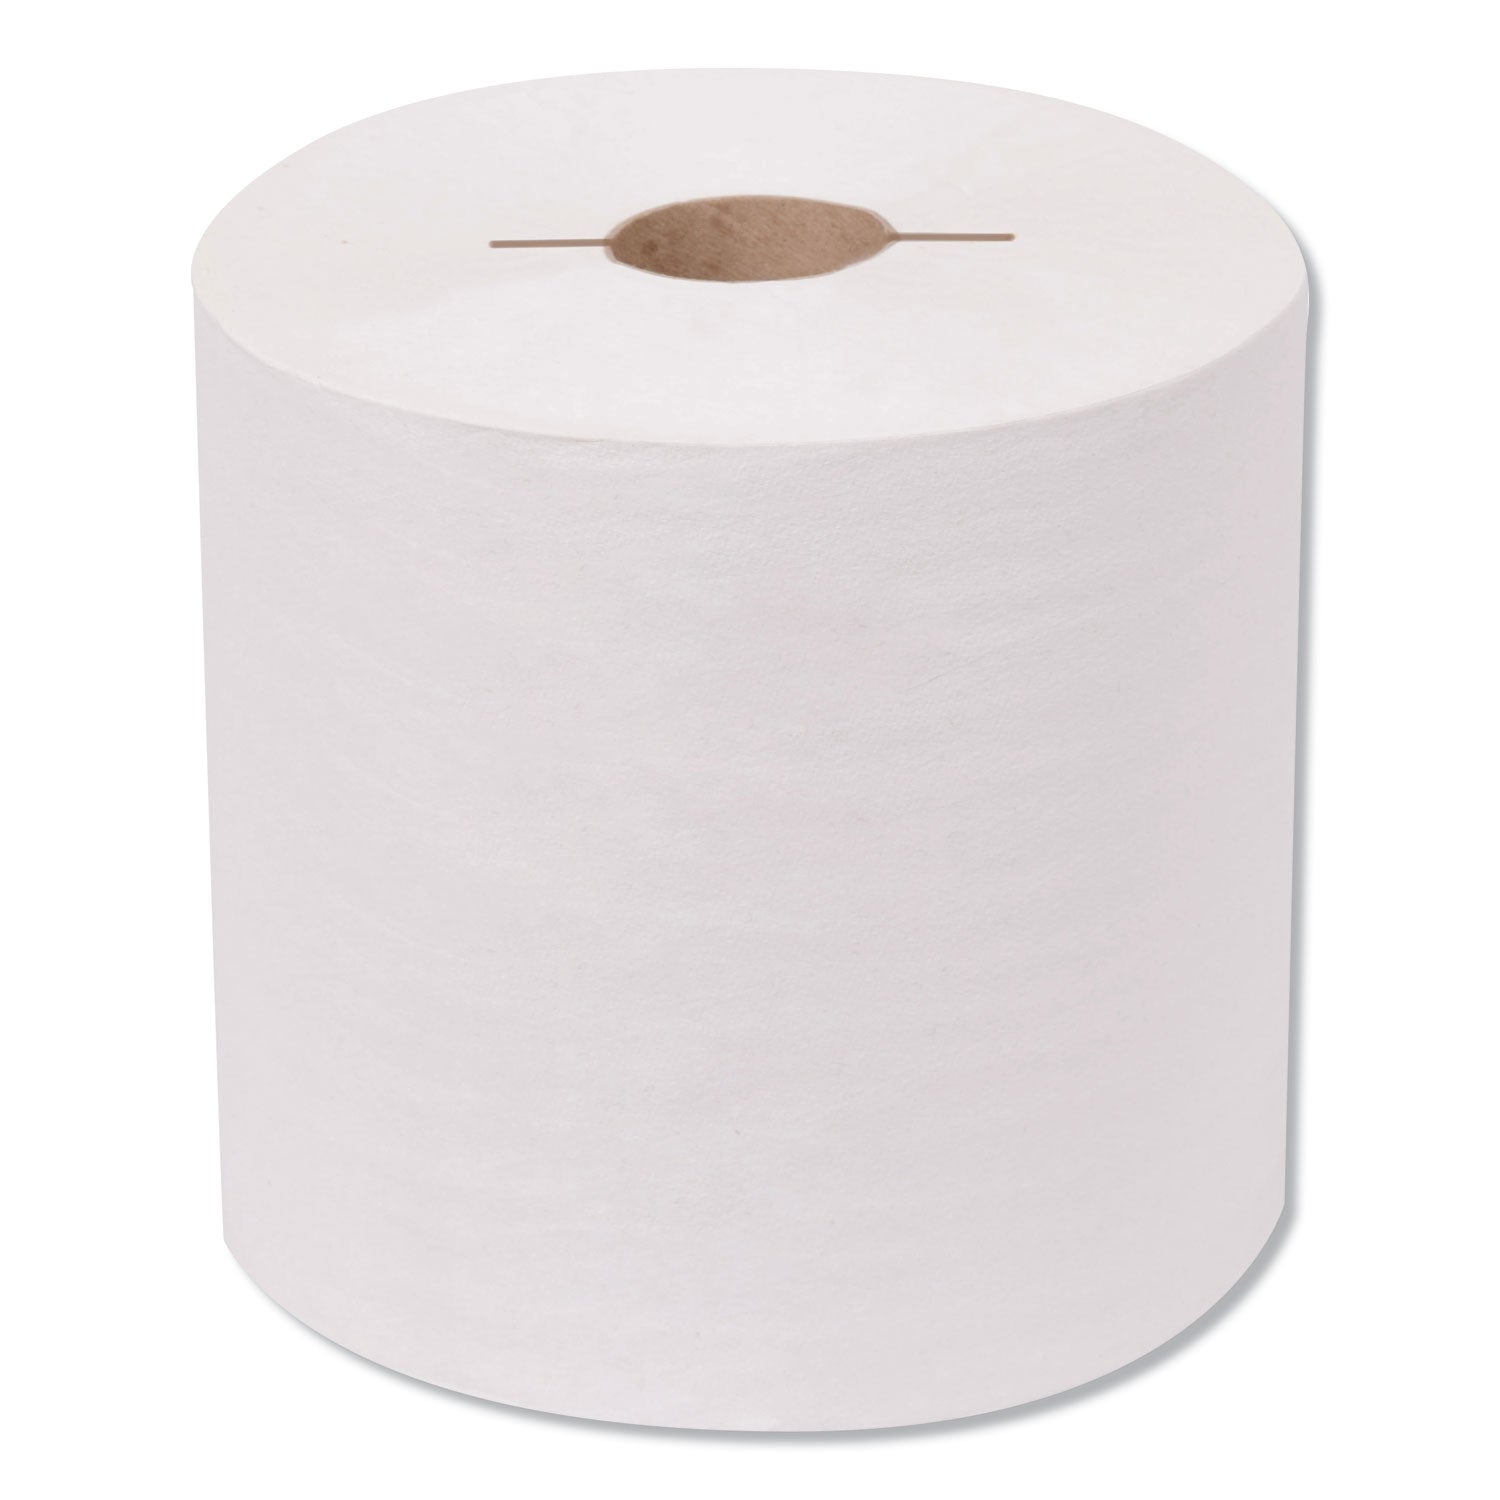 premium-hand-towel-roll-notched-1-ply-75-x-600-ft-white-720-roll-6-rolls-carton_trk7170630 - 1